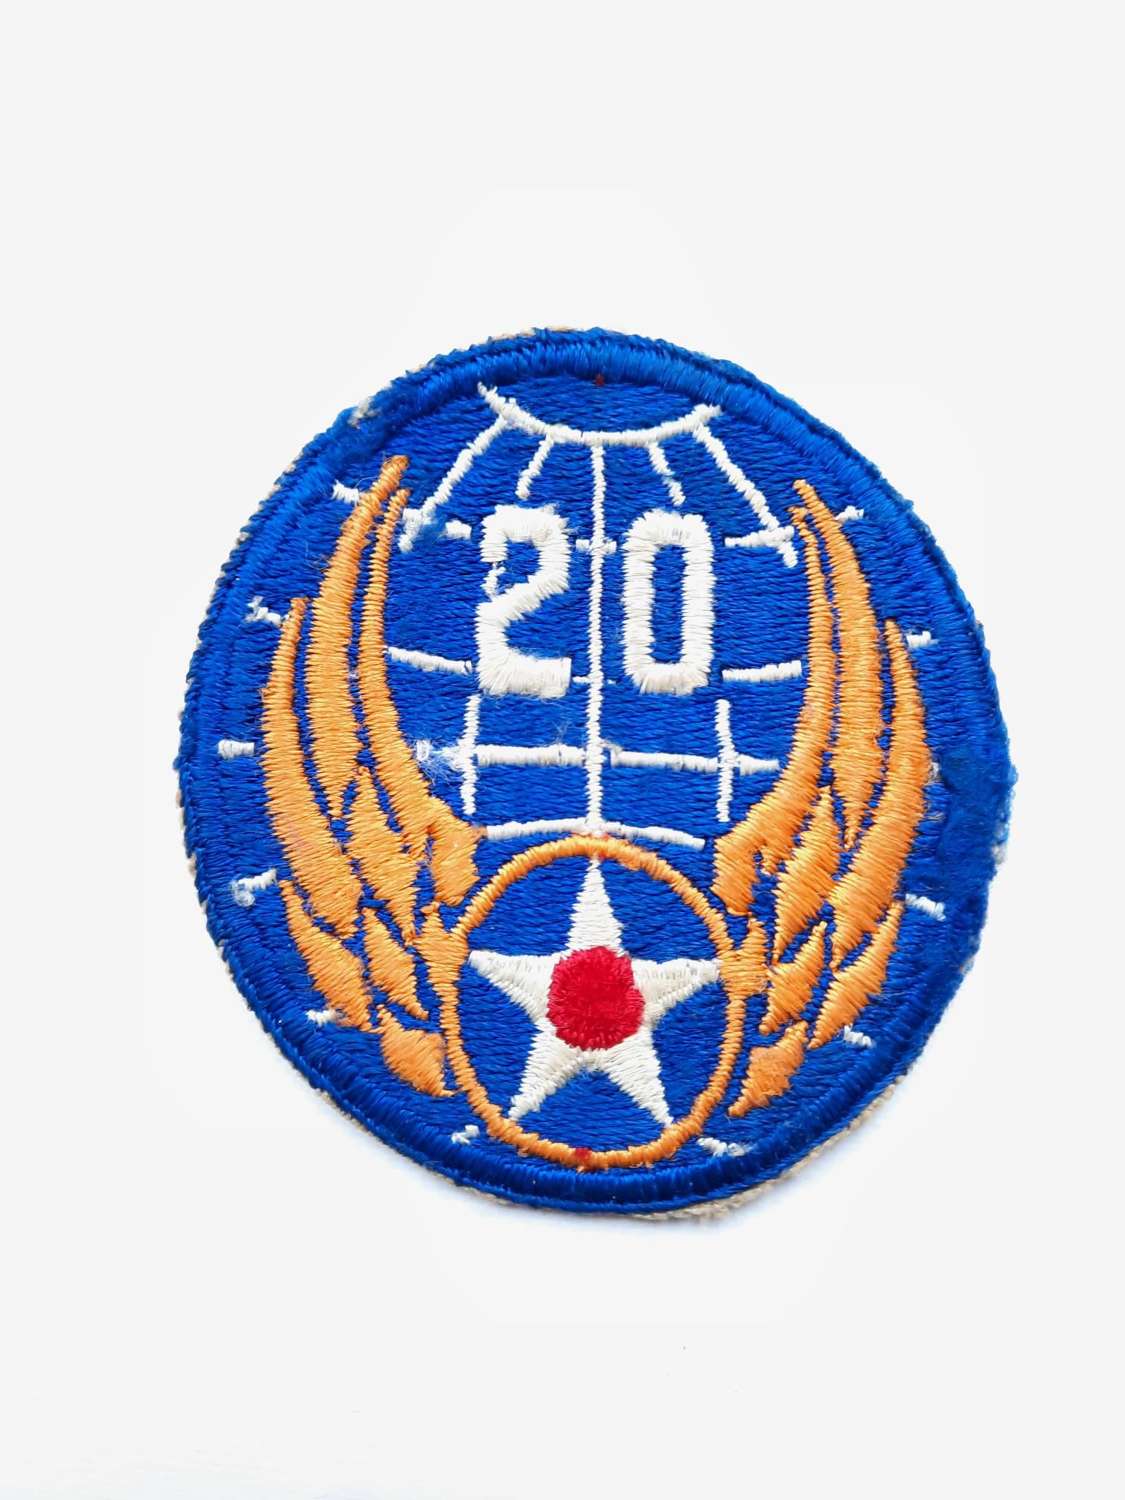 WW2 USAAF 20th Air Force Patch